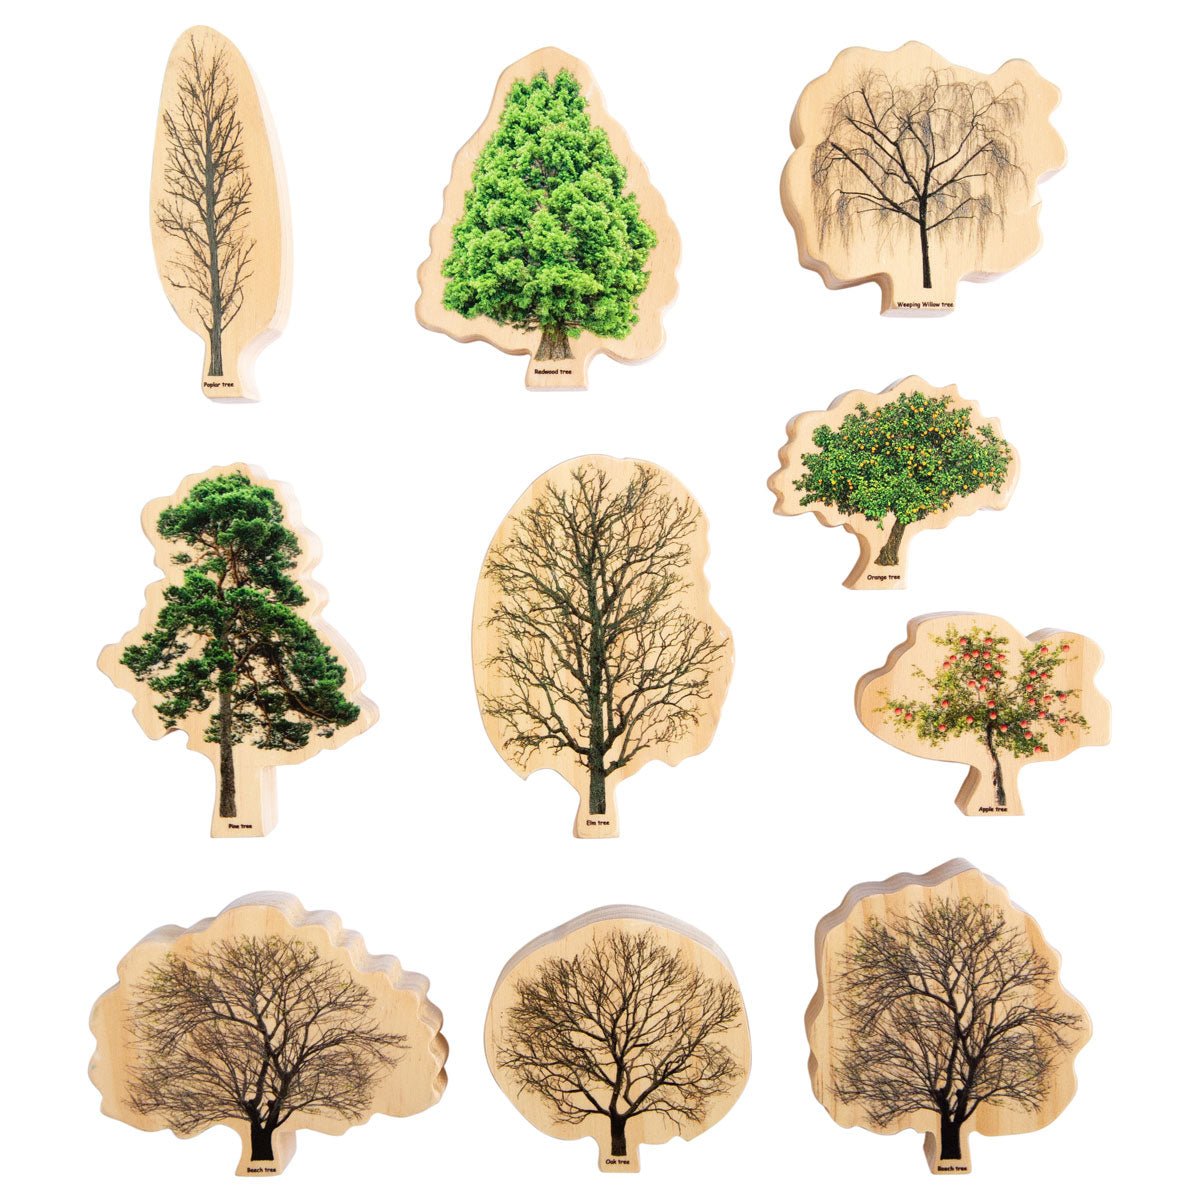 Trees Seasons | Learning and Exploring Through Play